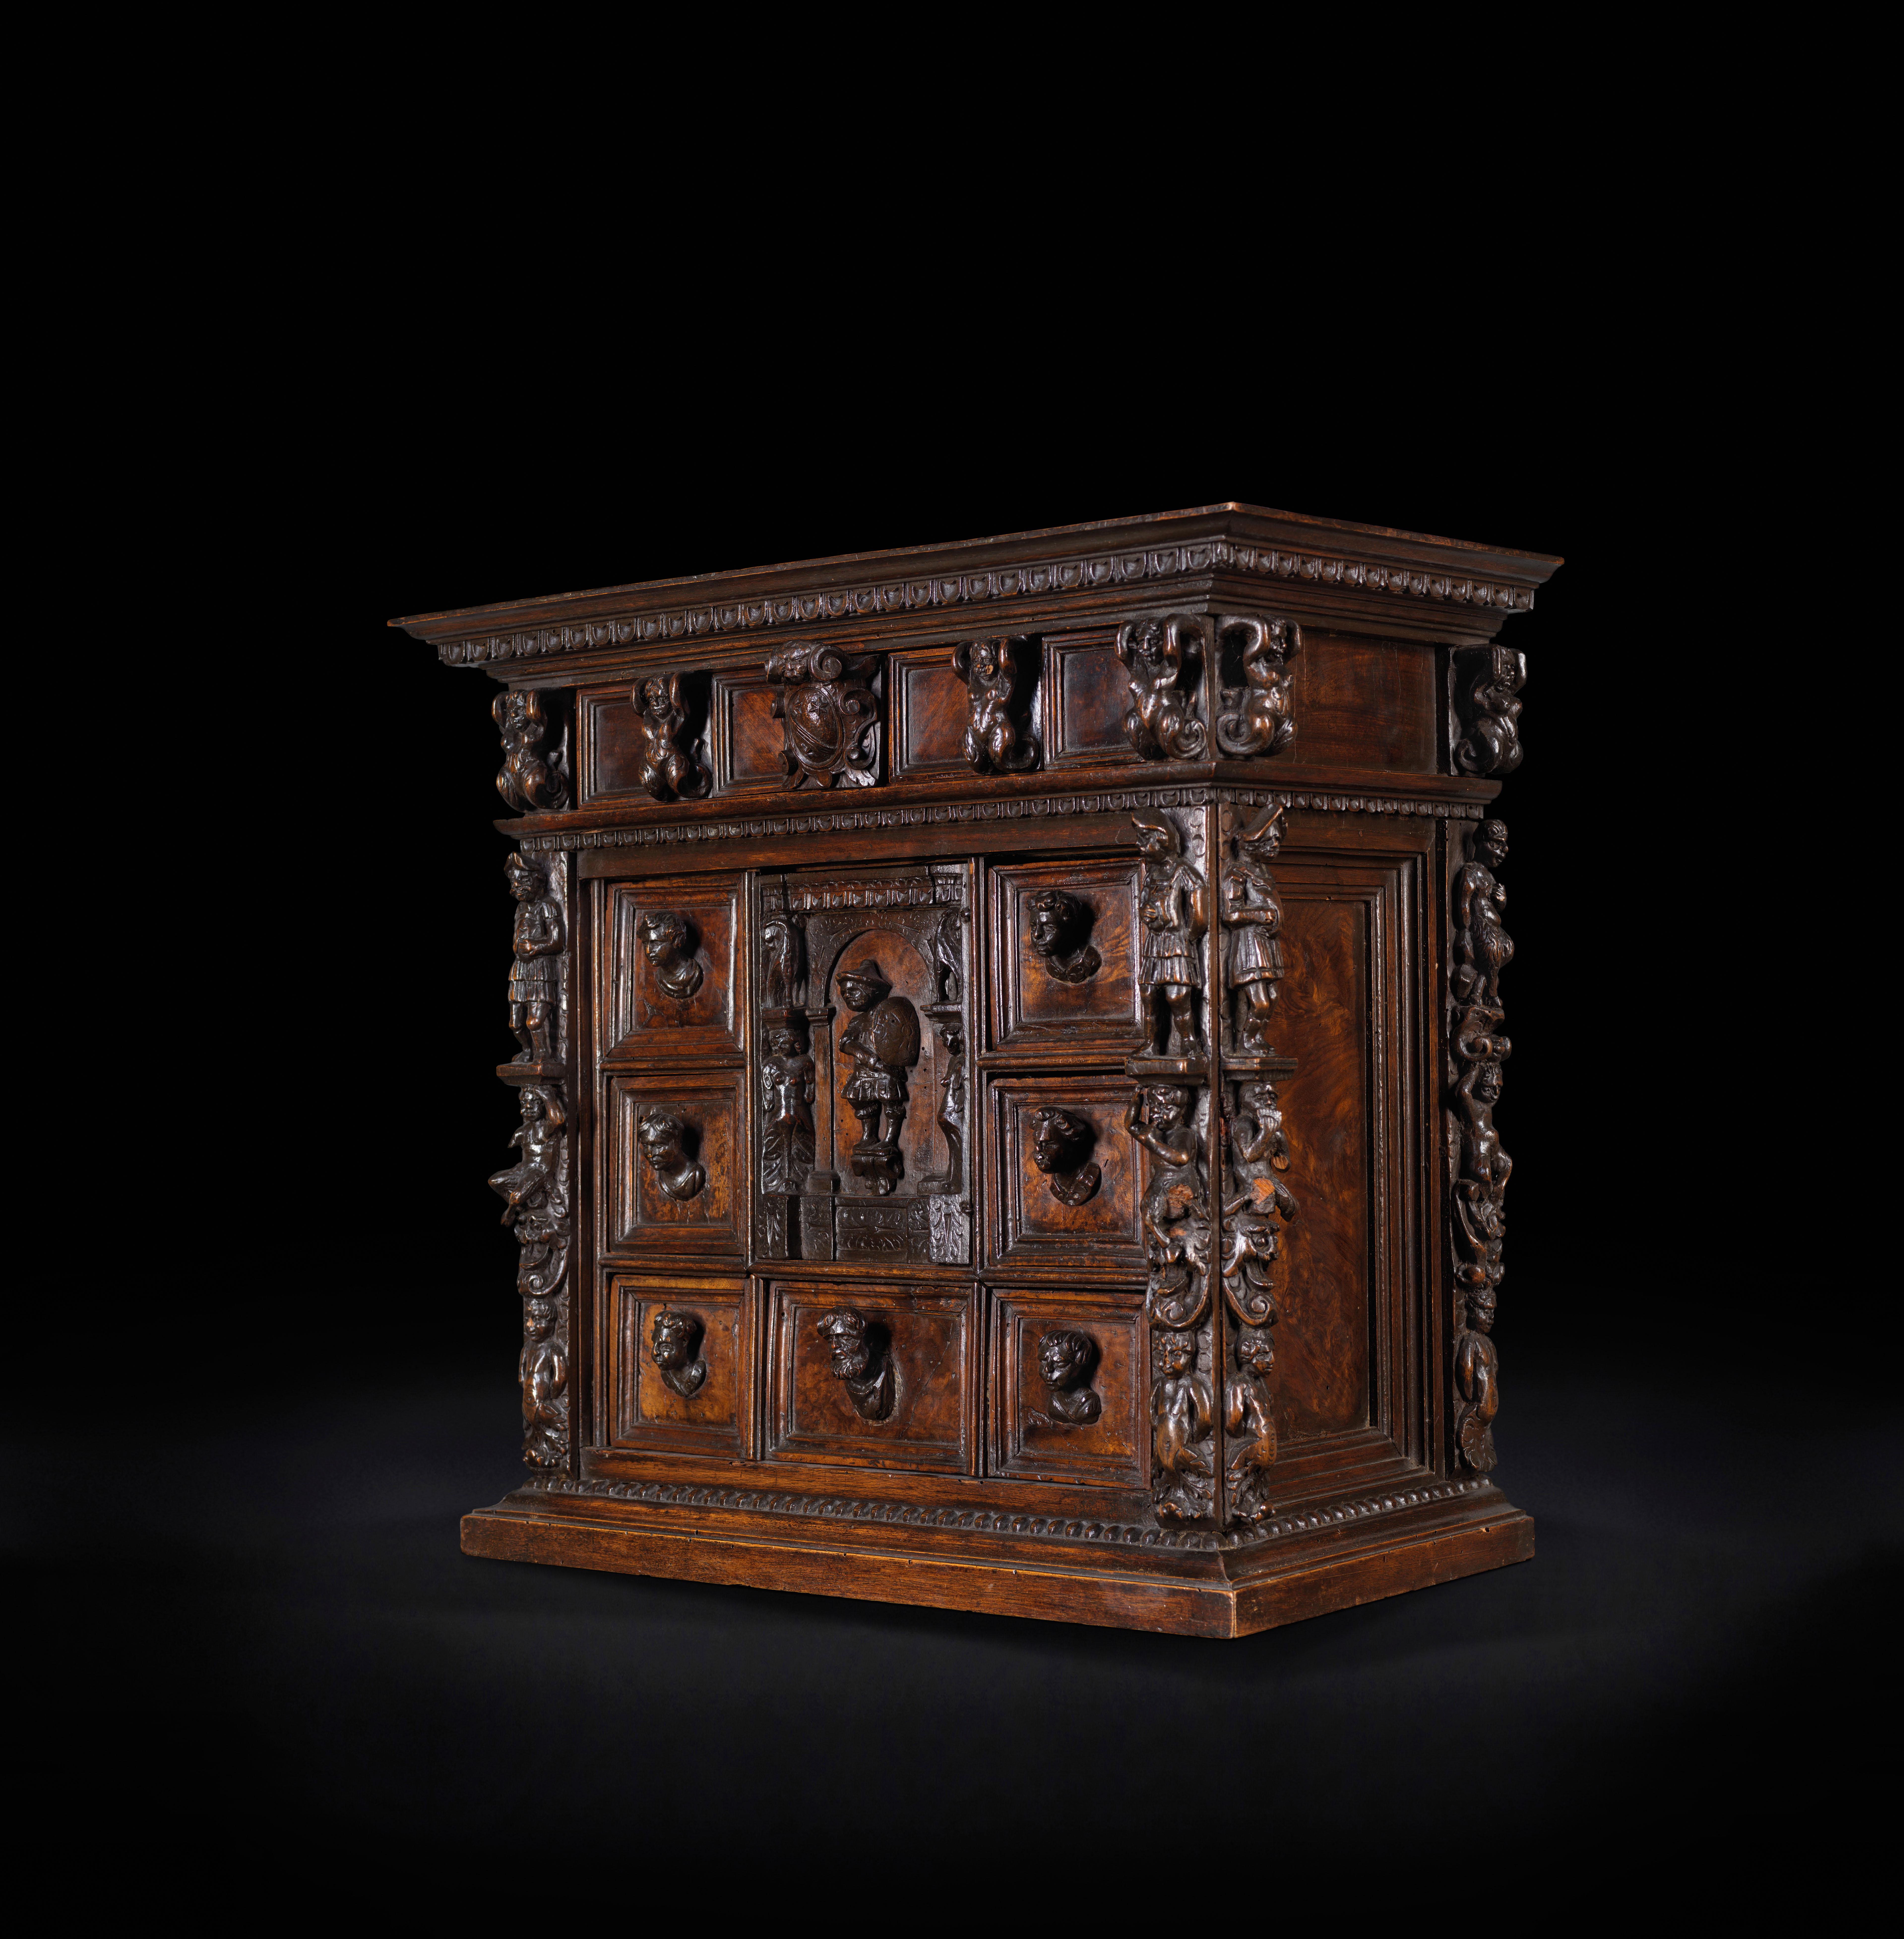 This Italian Renaissance Cabinet called Stipo evokes architecture forms. The earliest Stipo a bambocci appeared around or shortly after 1560 in Genova (Region of Ligura). All the sides are richly decorated with figures, busts, masks and terms. The